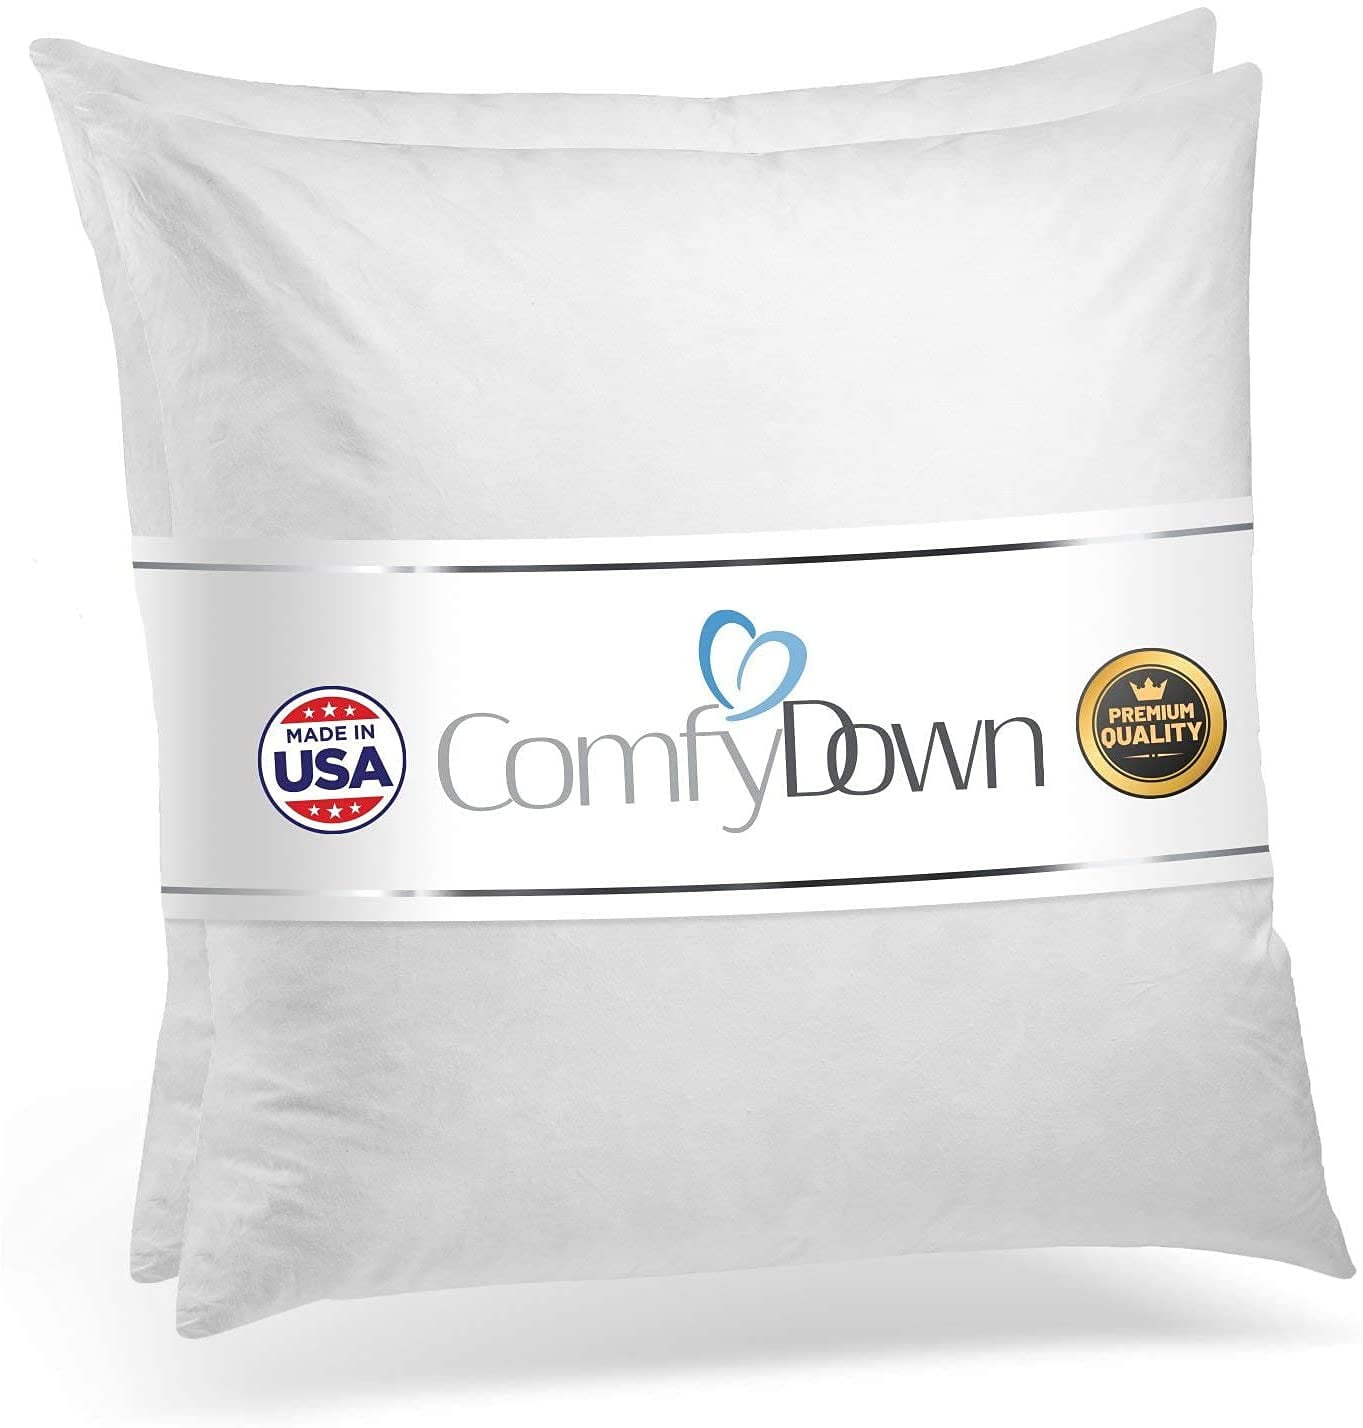 MoonRest 14x14 Inch Synthetic Down Alternative Square Pillow Insert Form  Stuffer for Sofa Shams, Decorative Throw Pillow, Cushion and Bed Pillow